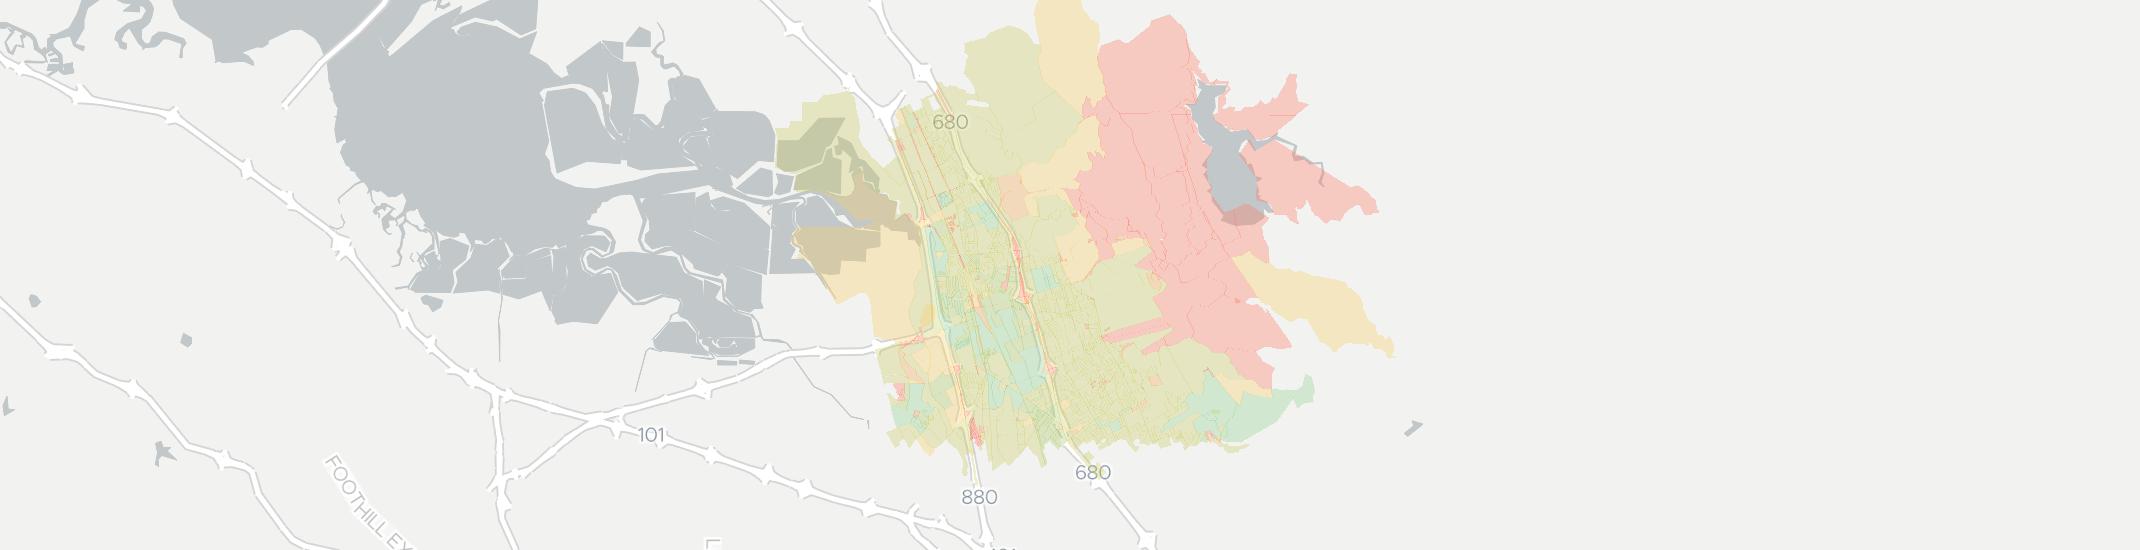 Milpitas Internet Competition Map. Click for interactive map.